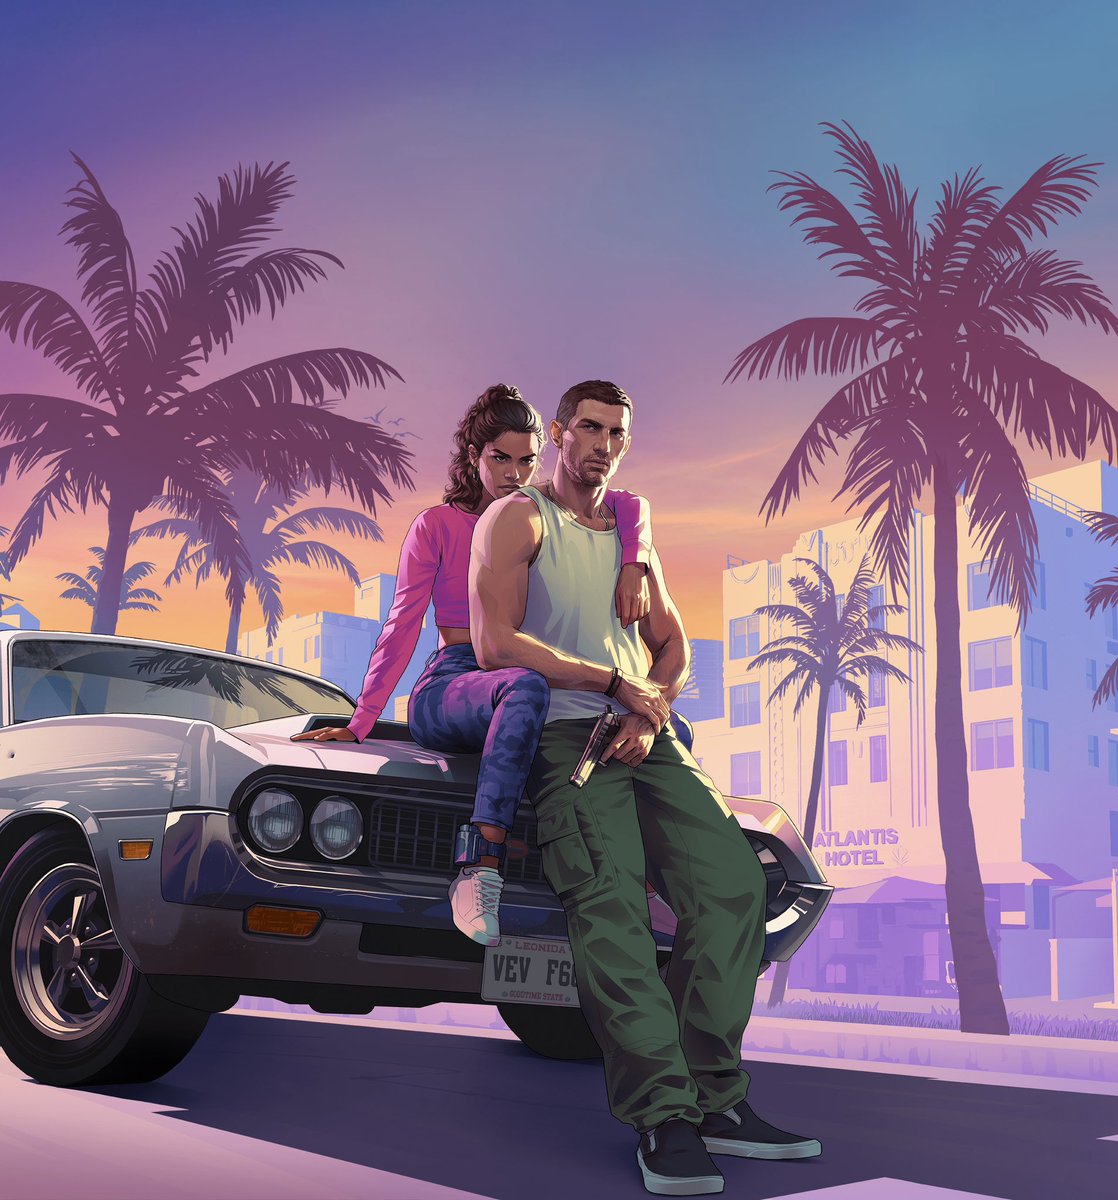 GTA 6 will seemingly release in early 2025.

Take-Two is sticking to their massive $8 billion revenue forecast for Fiscal 2025 (between April ‘24 - March ‘25)